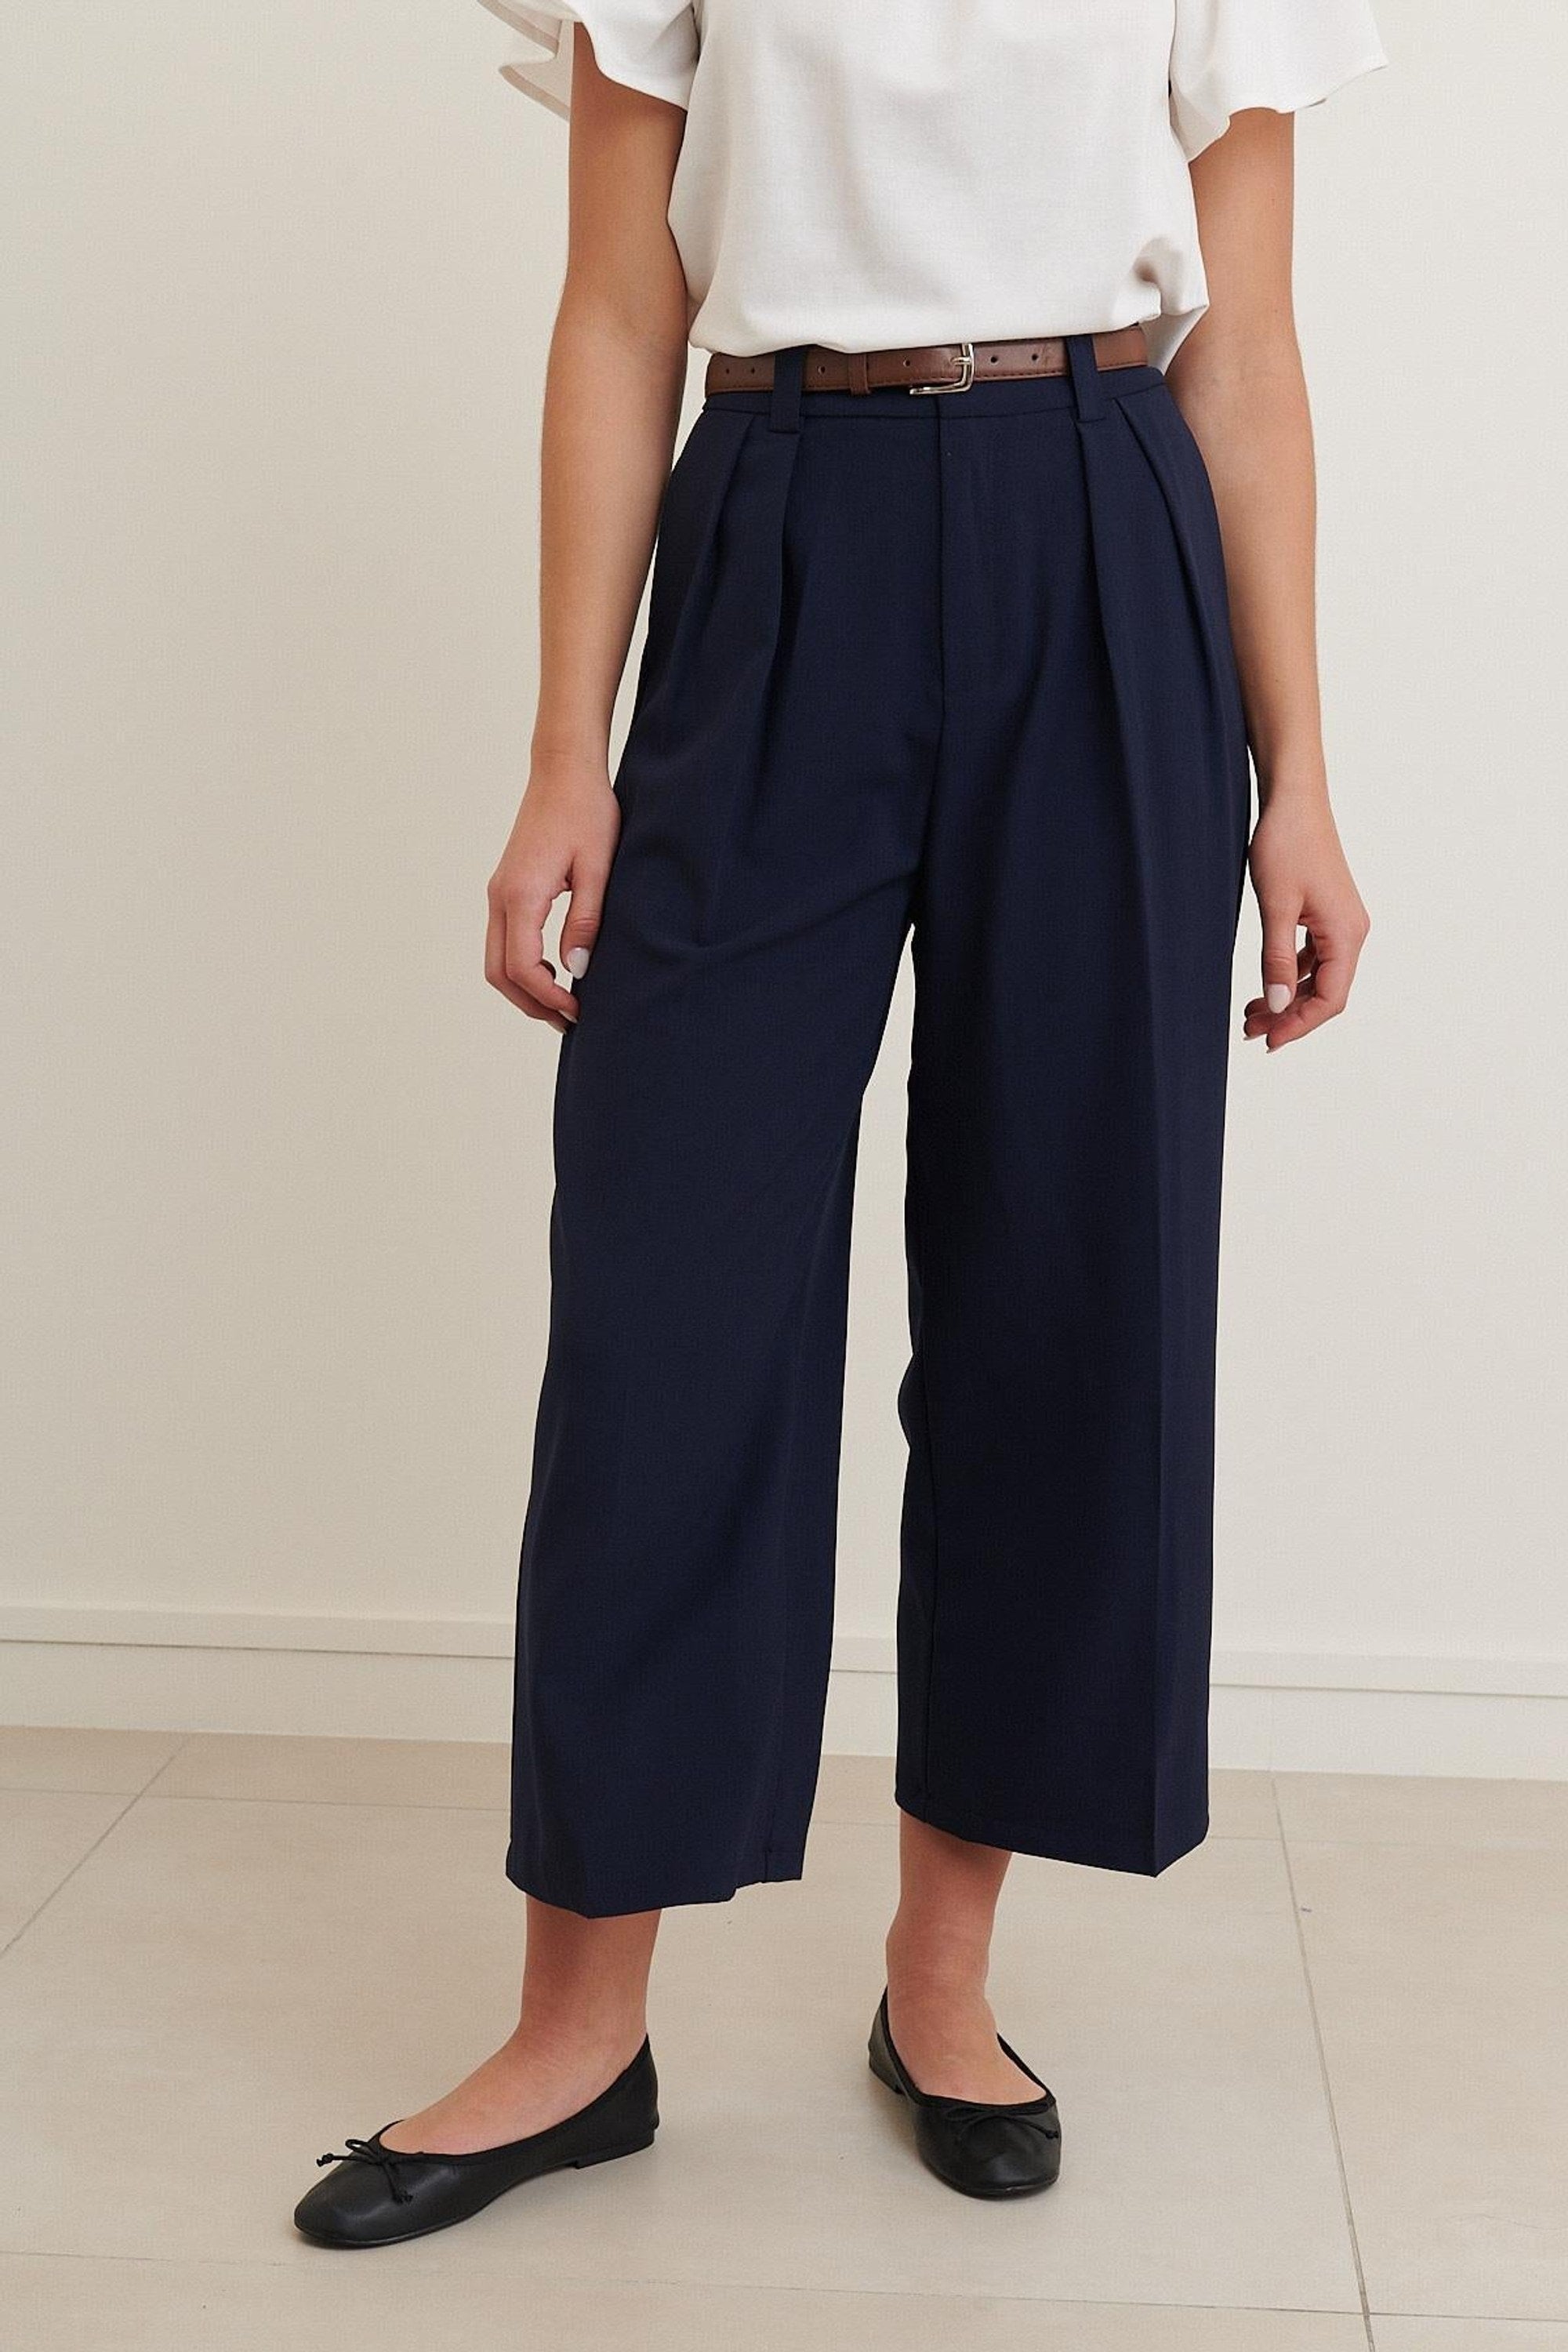 Clever Alice Cropped Pant - clever alice